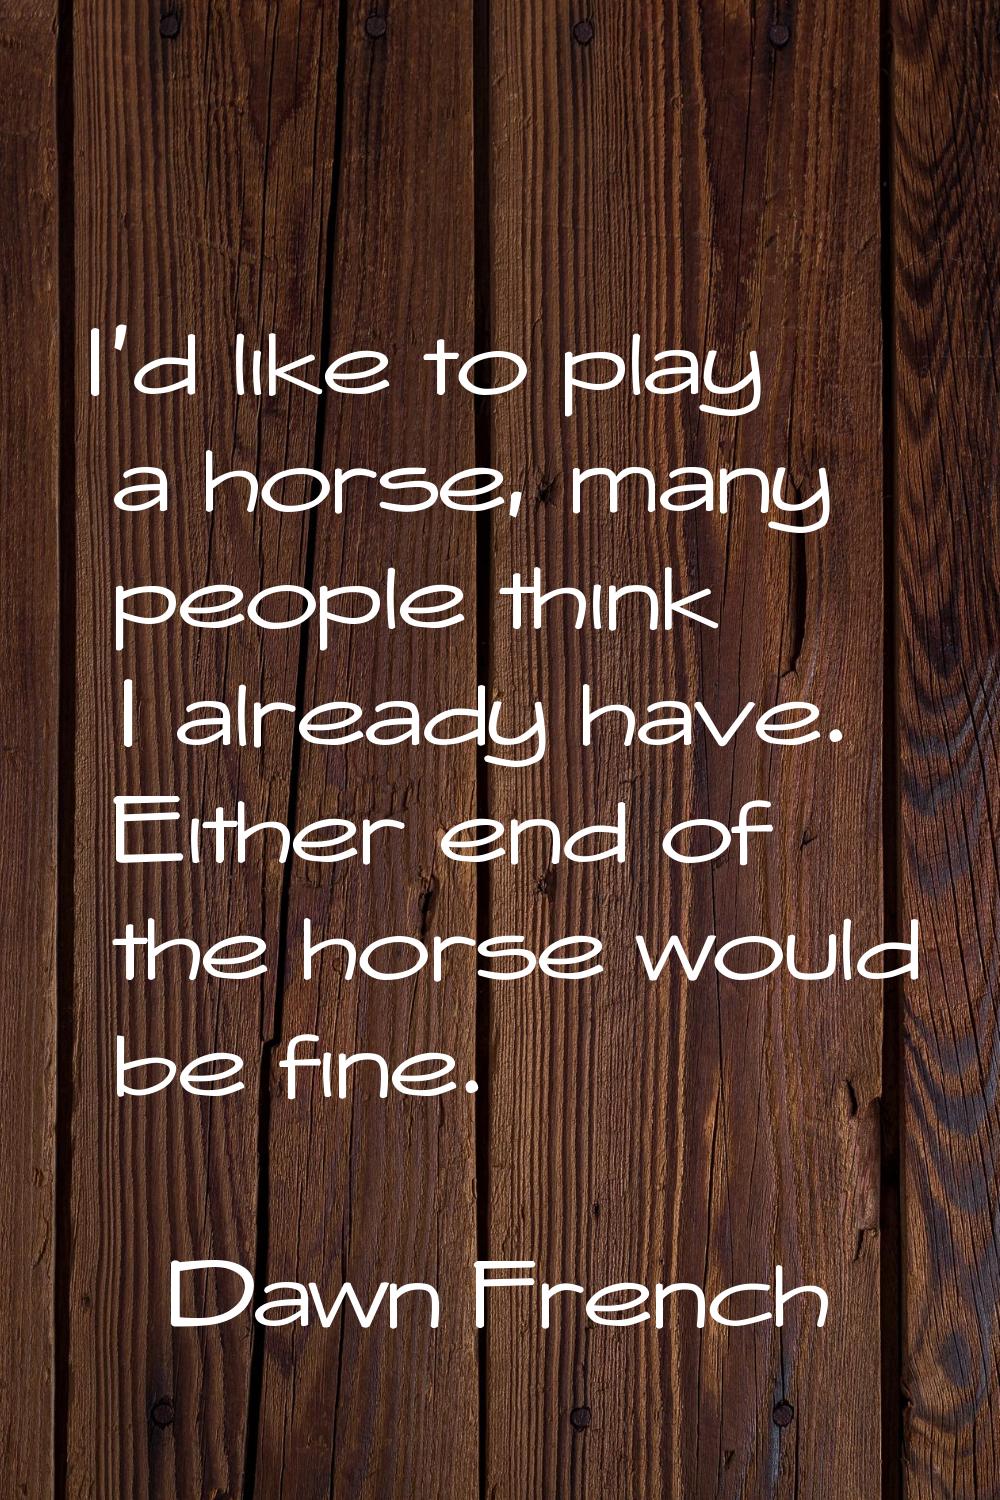 I'd like to play a horse, many people think I already have. Either end of the horse would be fine.